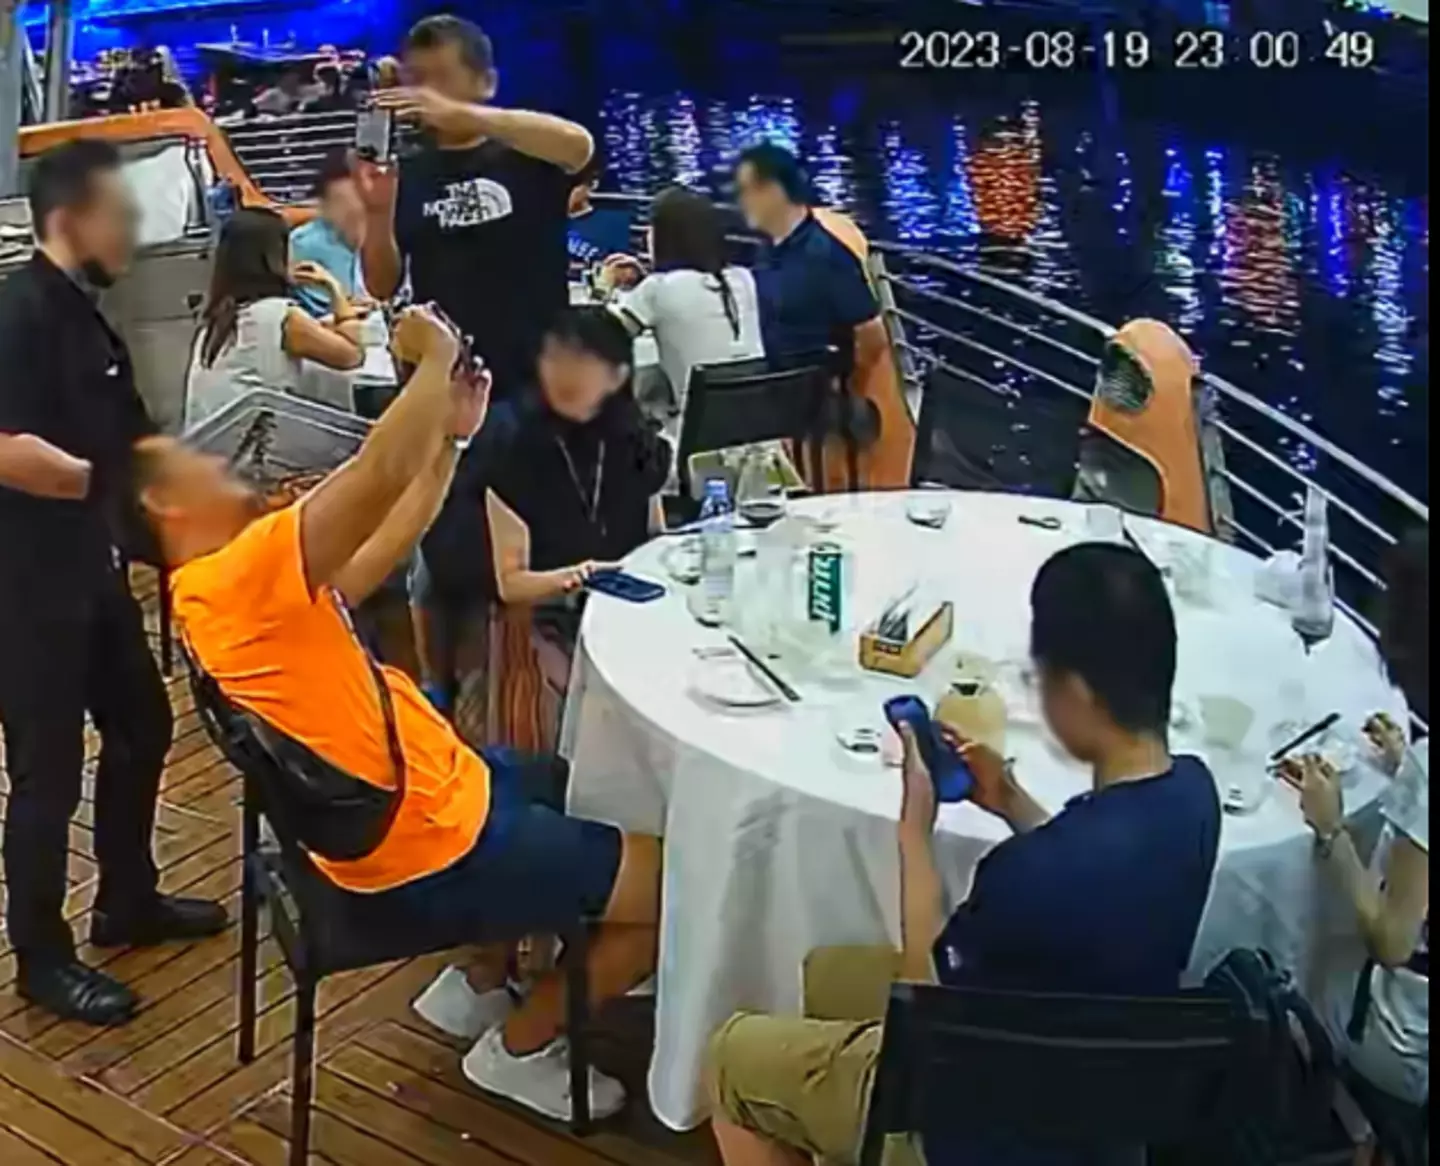 The CCTV shows the group taking selfies with the crab too.